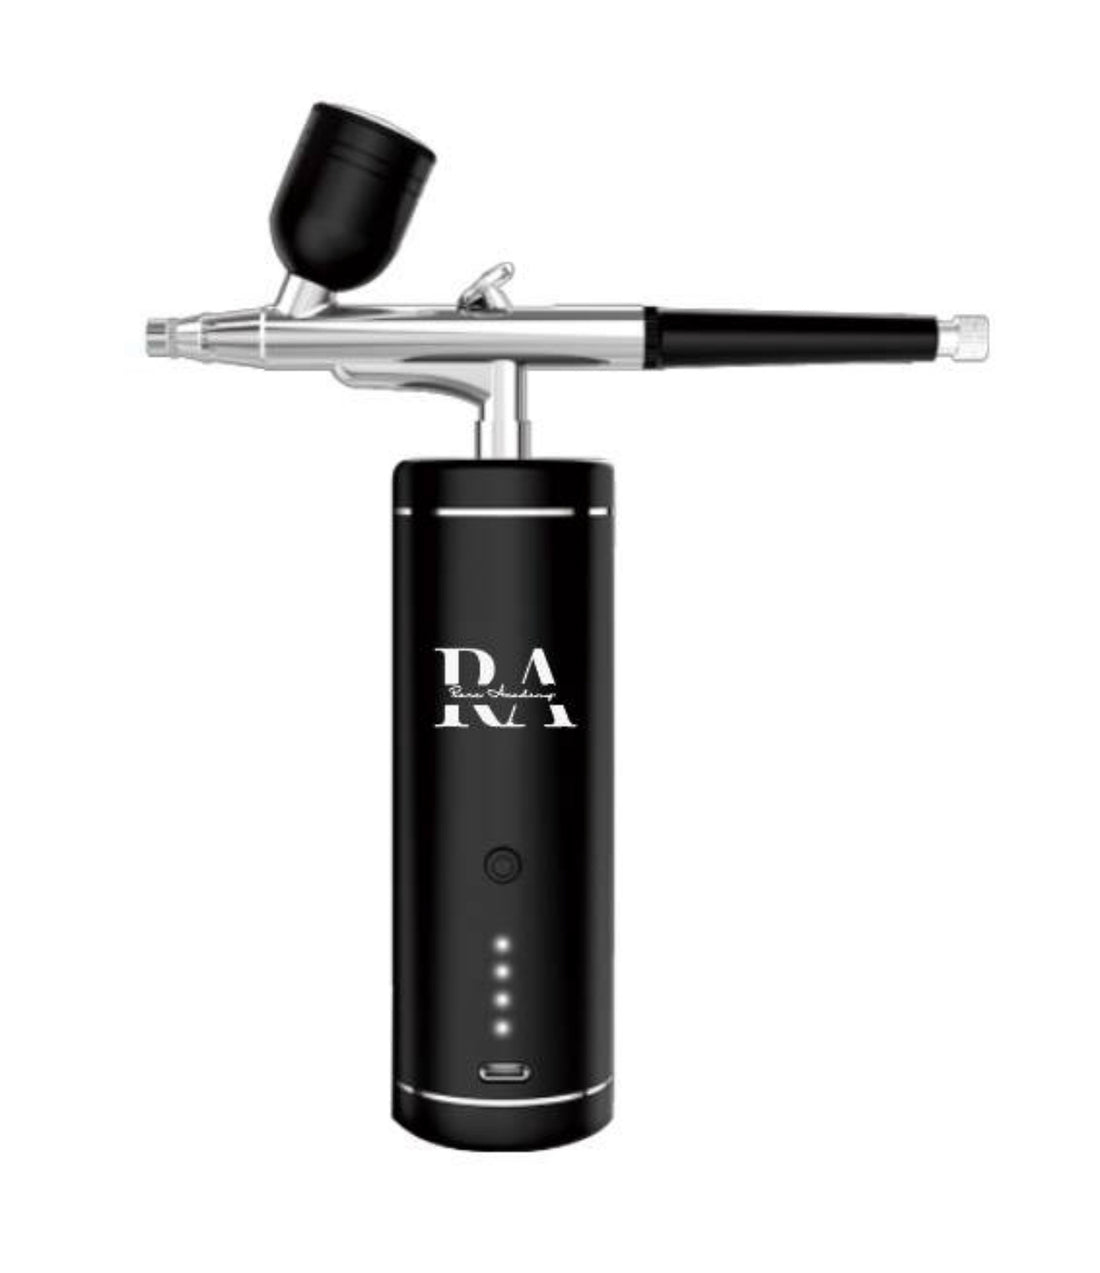 BROW AIRBRUSH GUN - *Must be purchased separately*